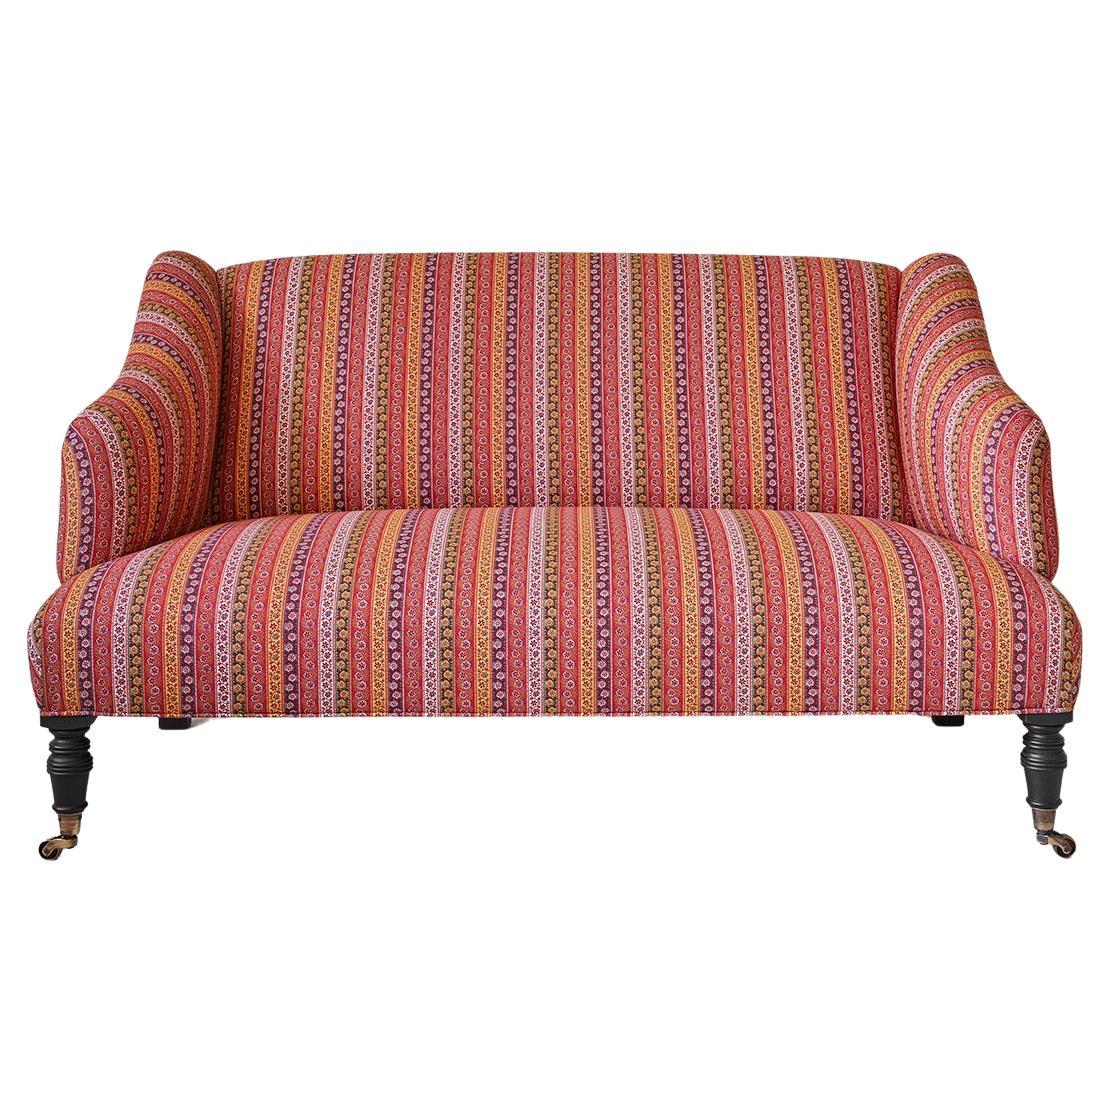 Contemporary Striped Sofa in Customized Upholstery by the Apartment, Belgium For Sale